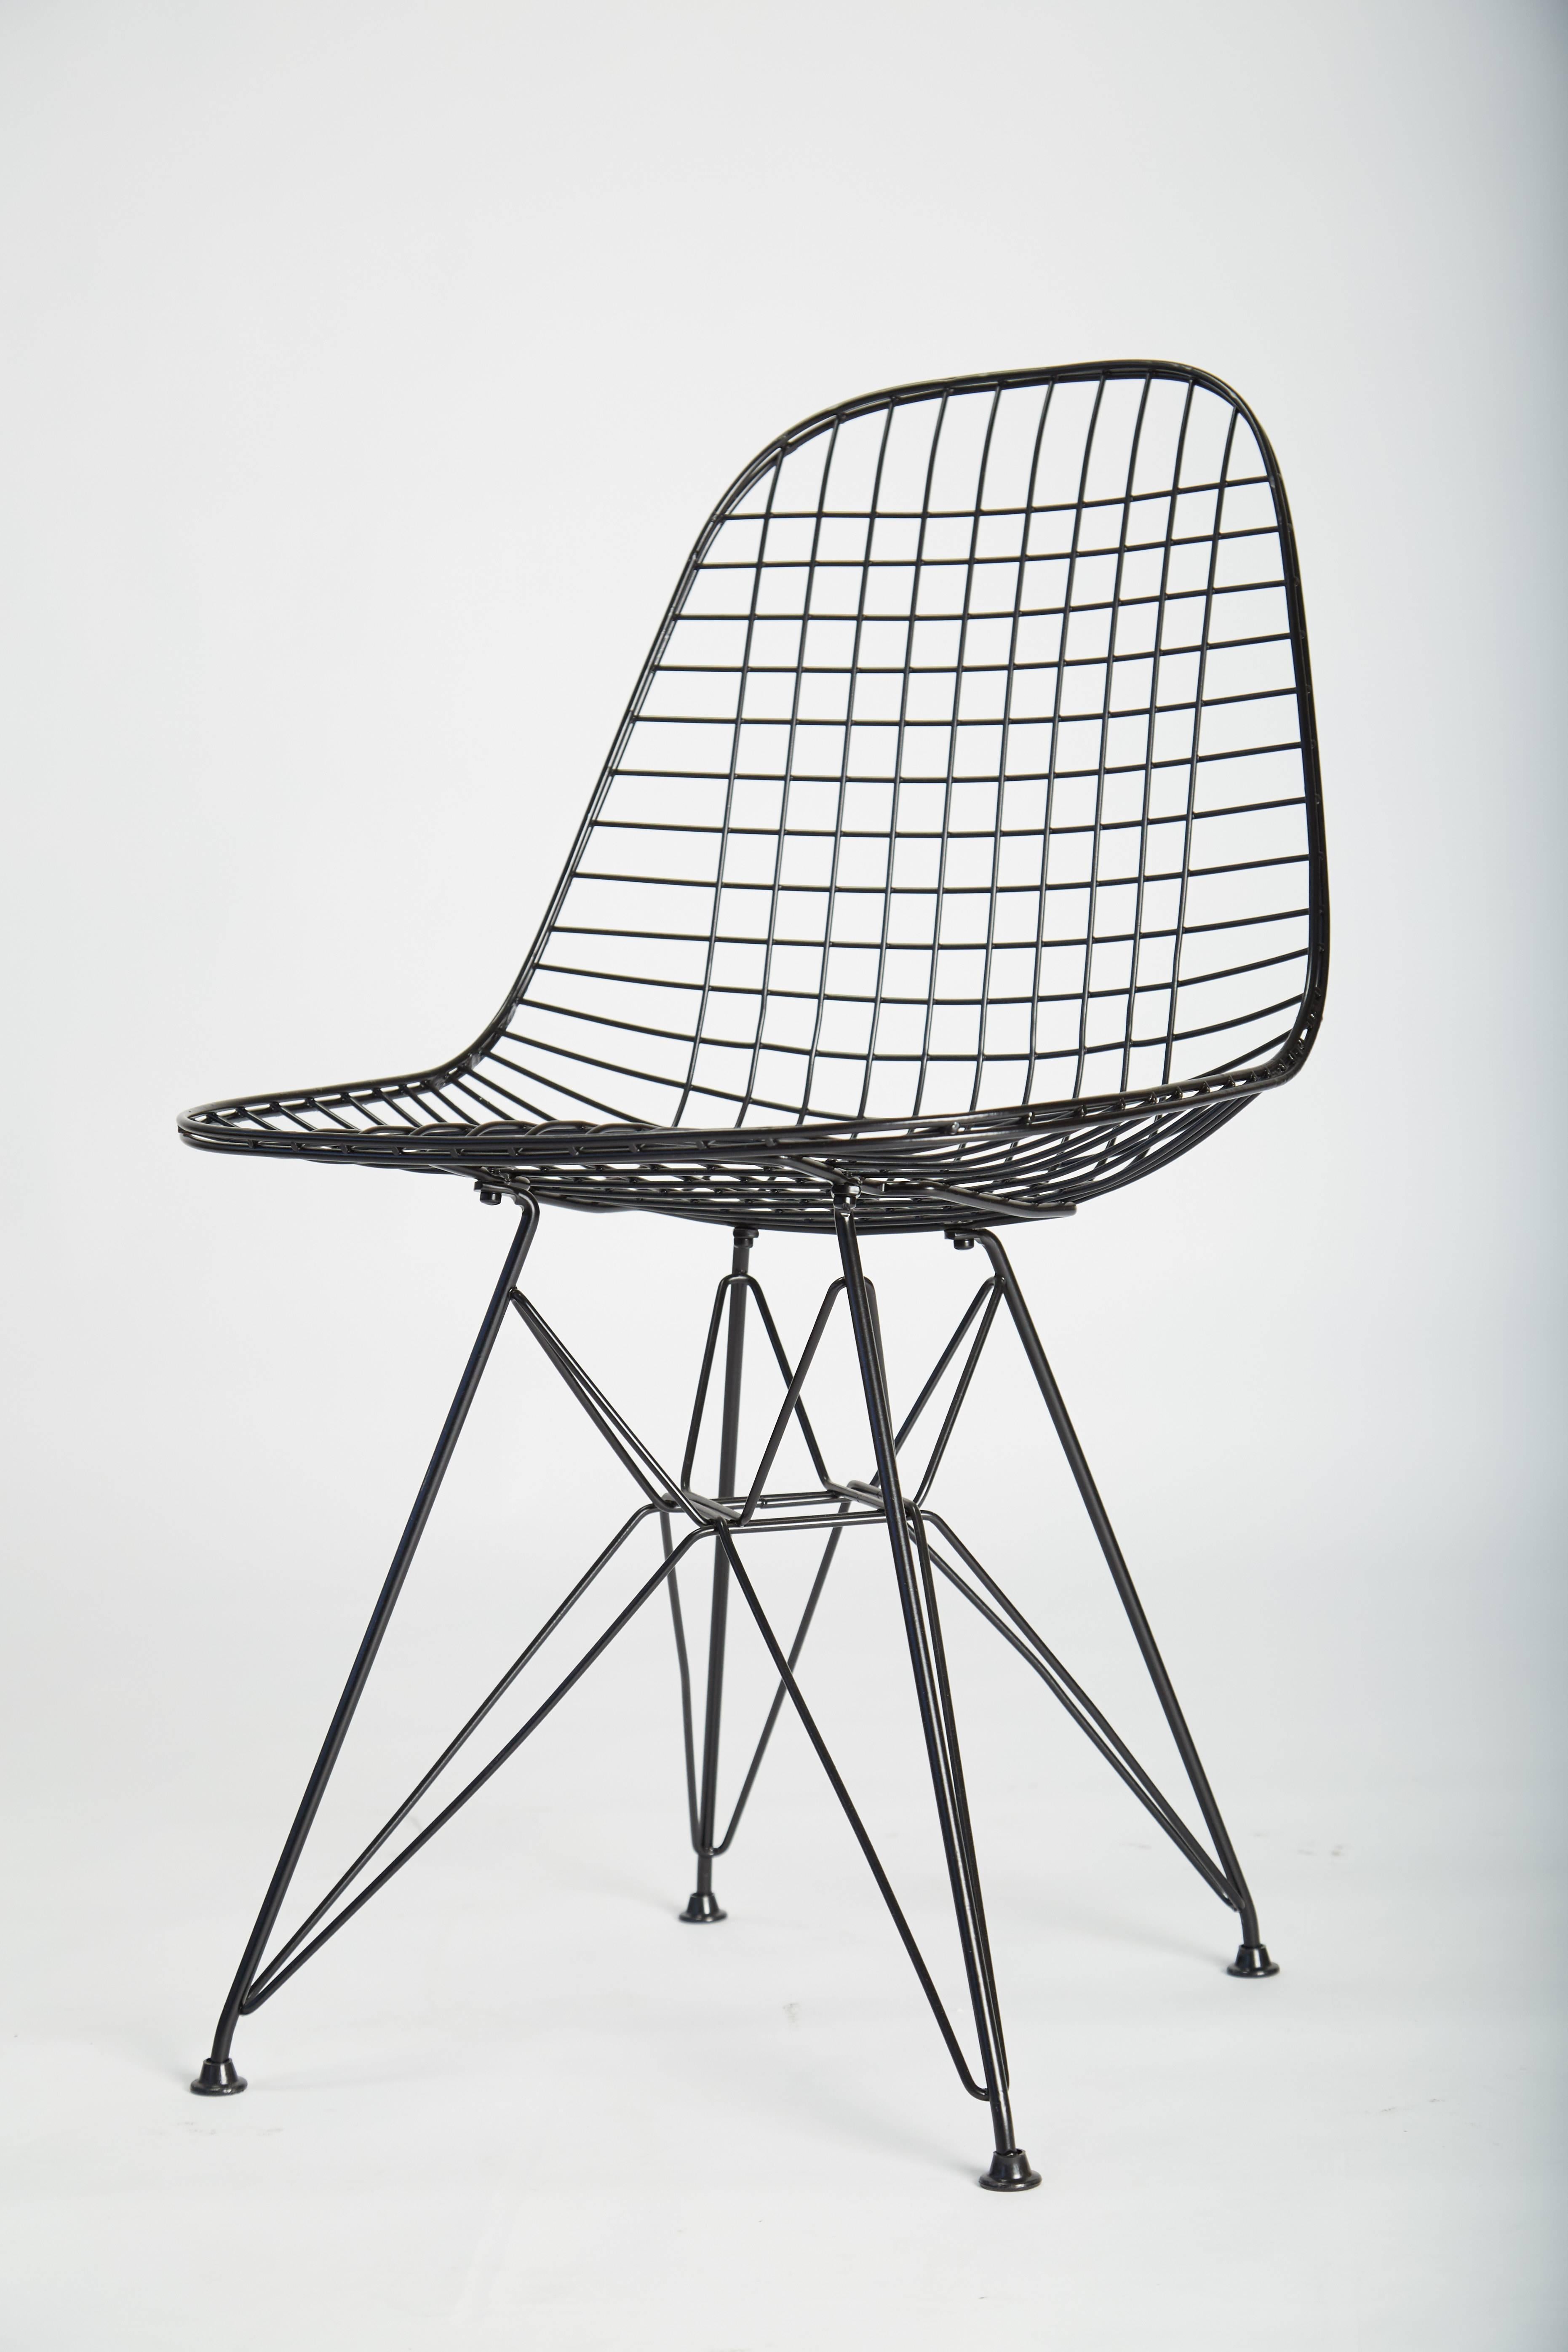 A pair of restored wire chairs with "Eiffel Tower" base. The frame is formed by a web of crossed wires and is fixed to a wire base with sculptural lines. These examples have been powder-coated and are suitable for indoor or outdoor use.